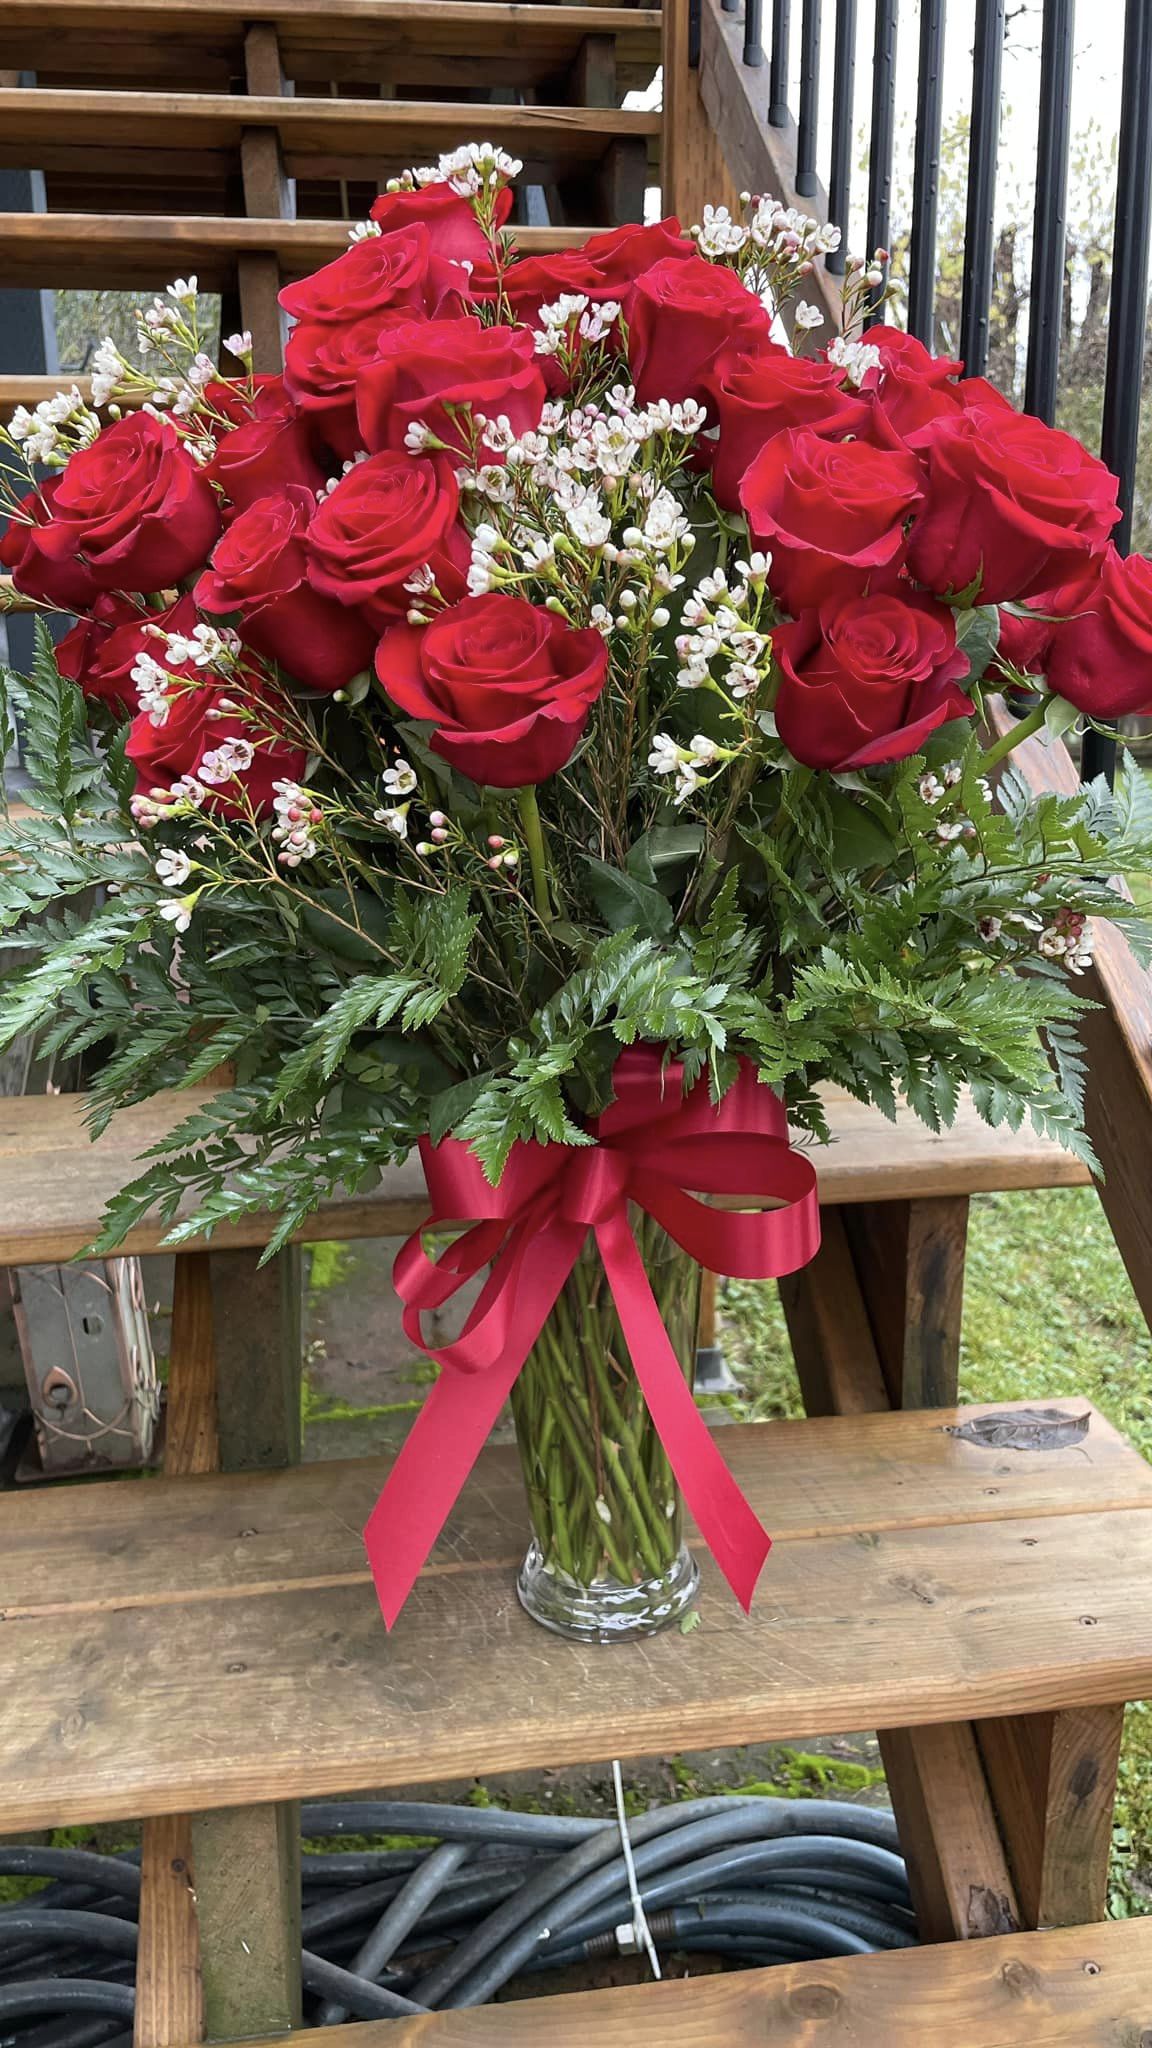 There is something about red roses that says it all!!